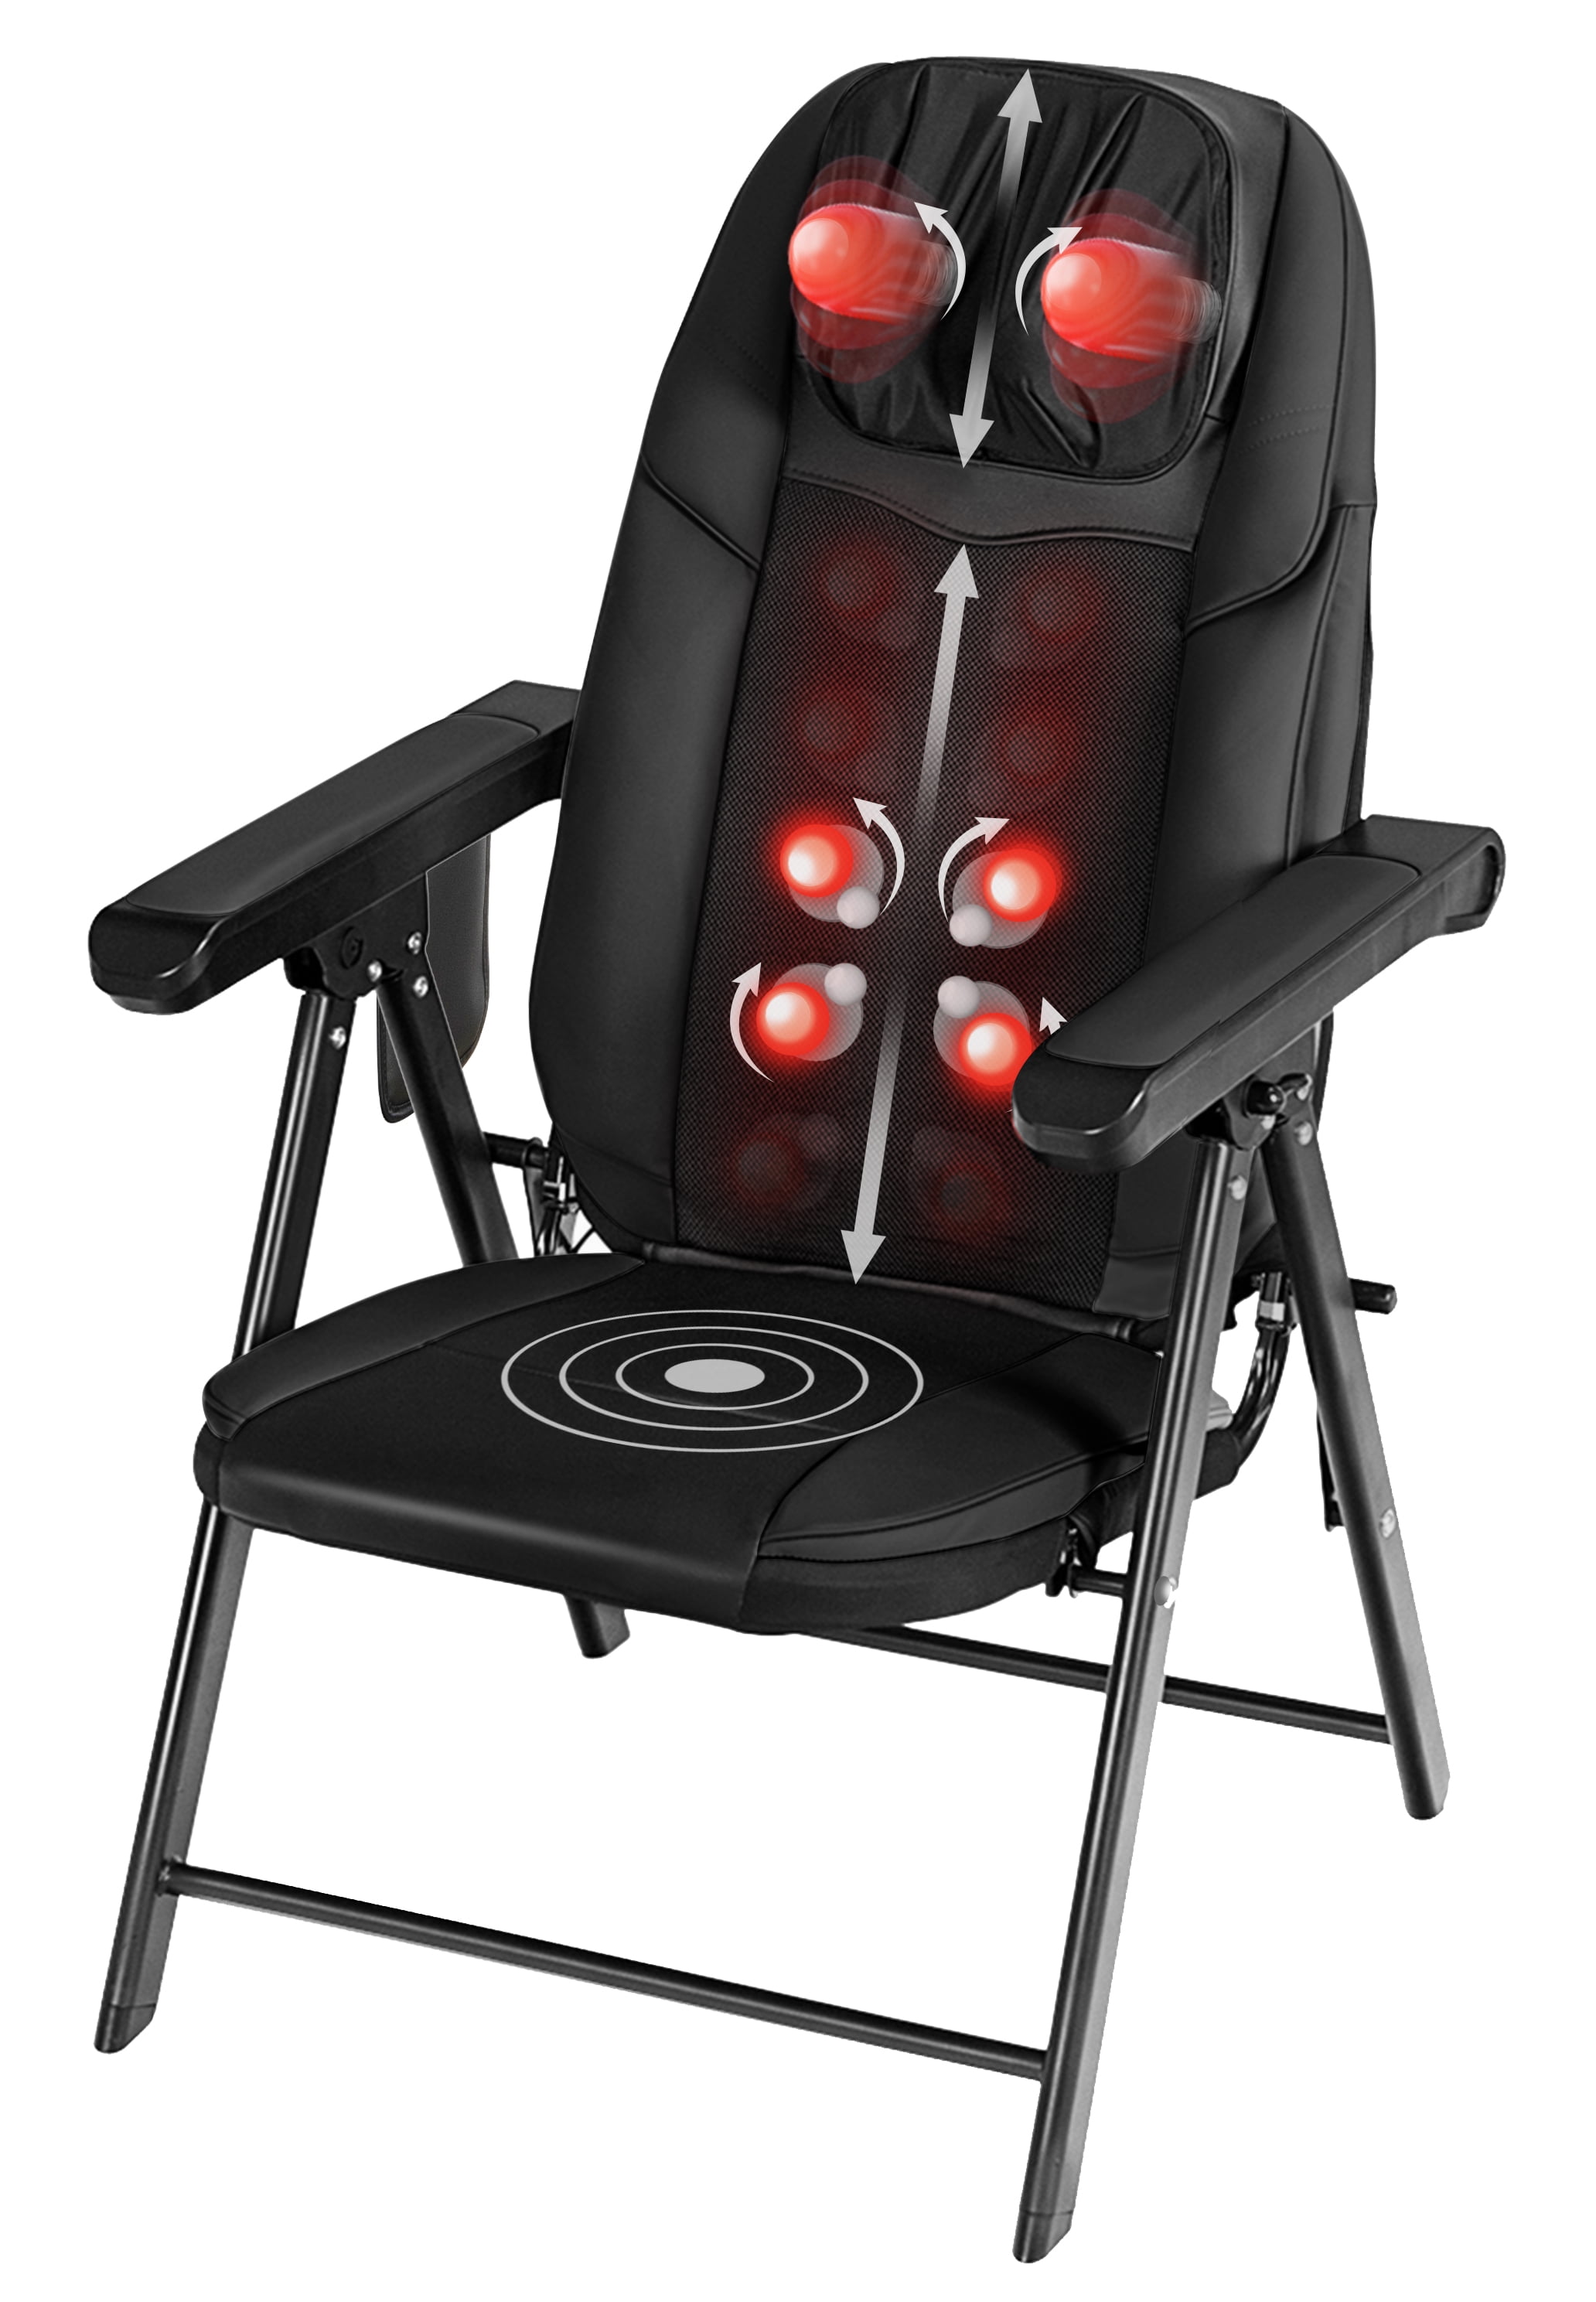 Comfier Partable Folding Massage Chair Shiatsu Neck Back Massager With Heat For Home Officer